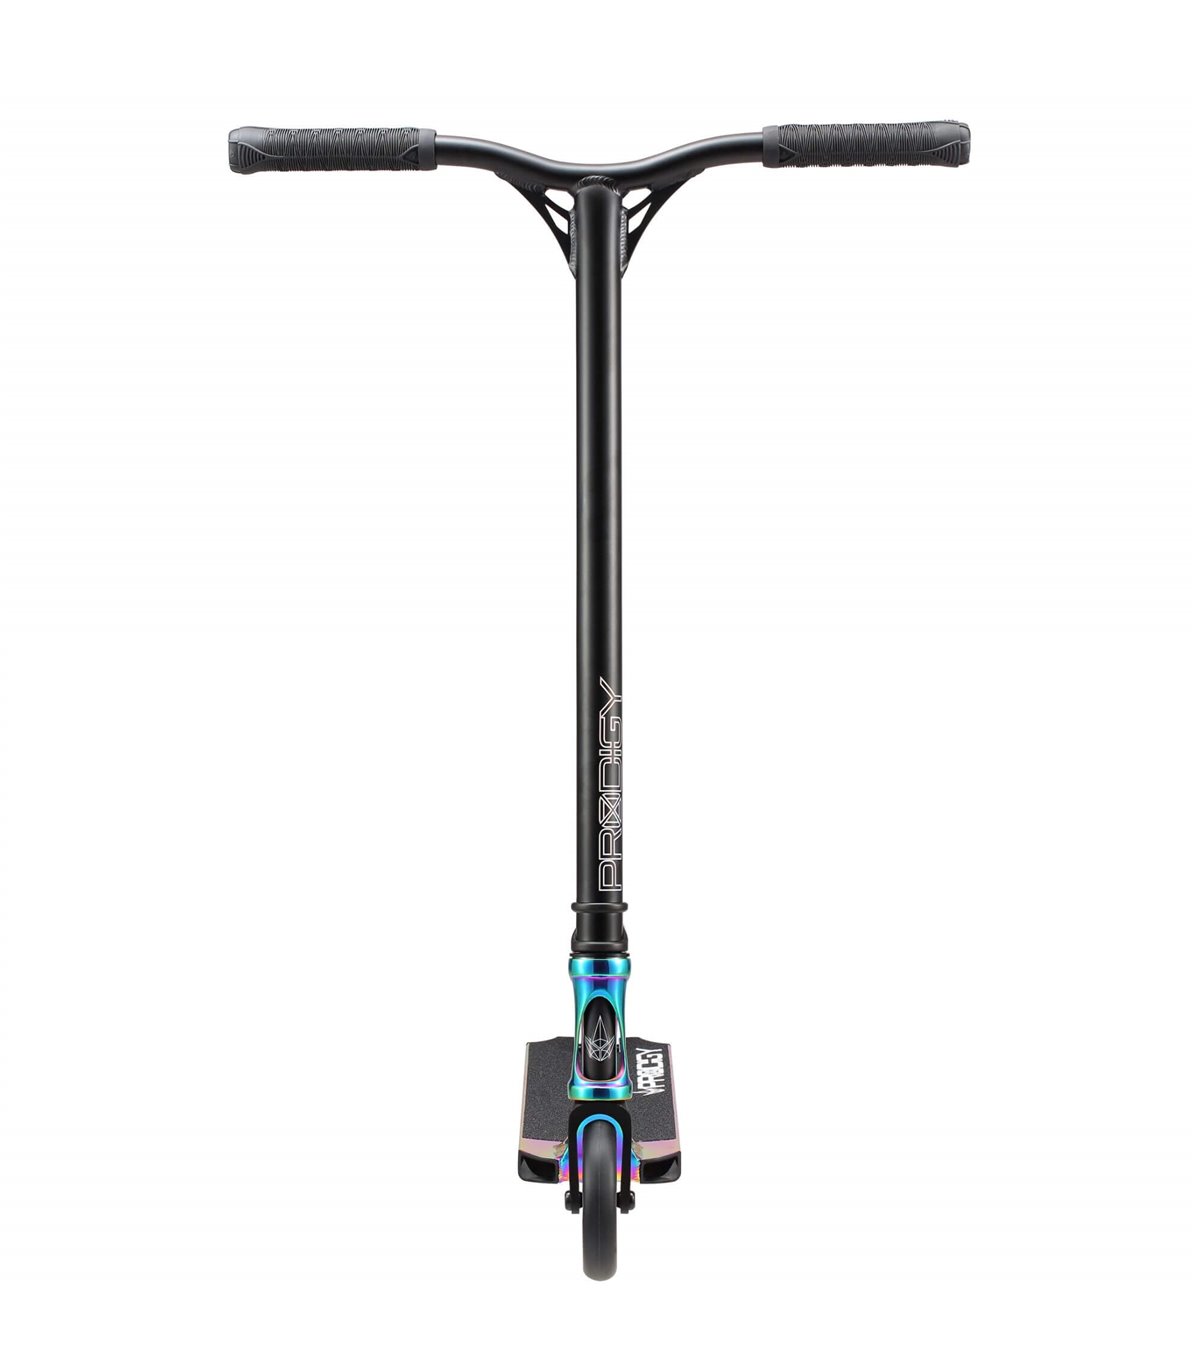 Trotinette freestyle Blunt Prodigy X-Oil-Slick - Magasin Suisse - Sportmania